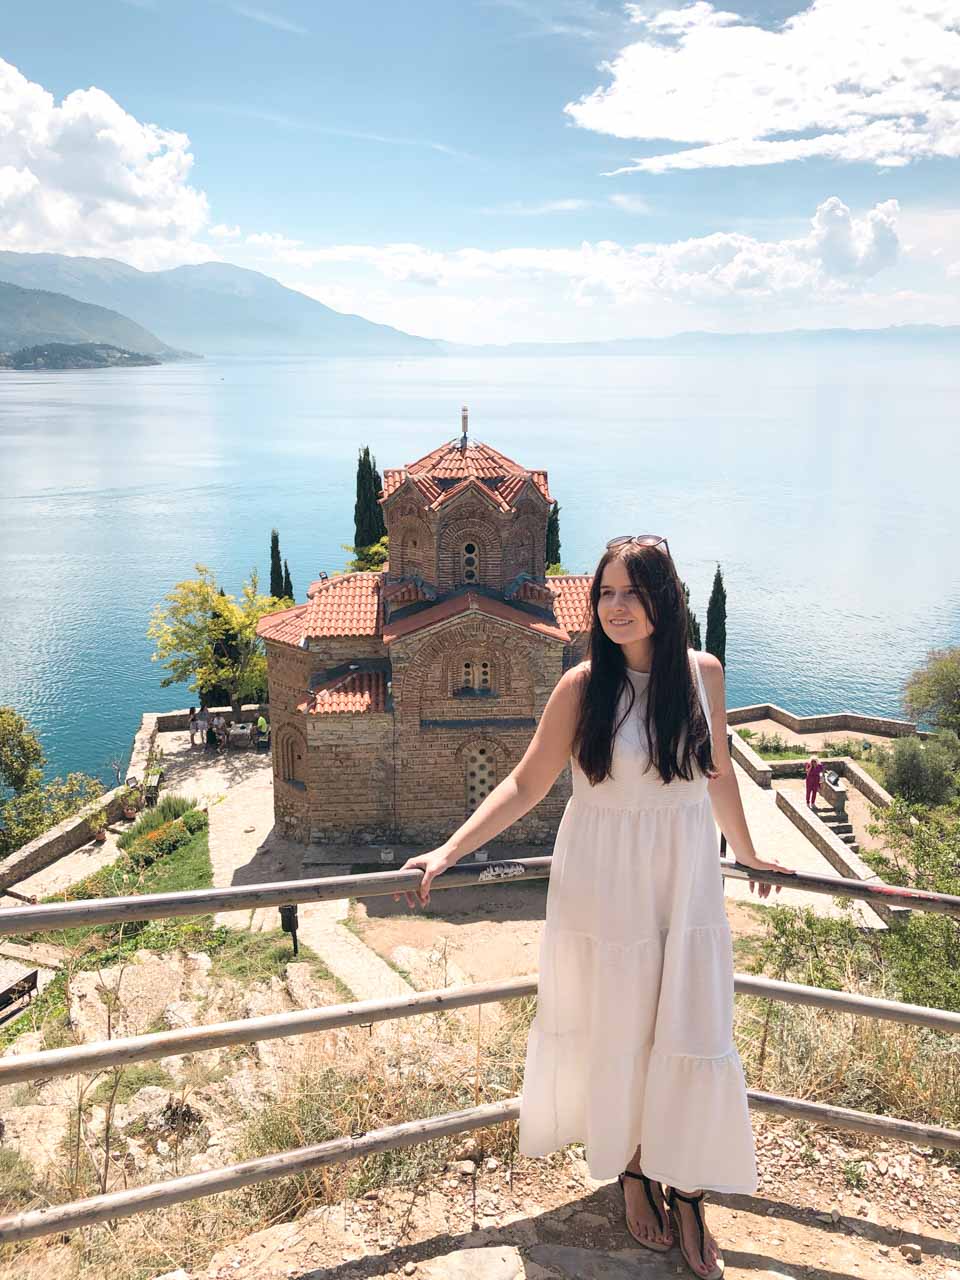 Woman in a white maxi dress standing on a platform overlooking the Church of St. John at Kaneo in Ohrid